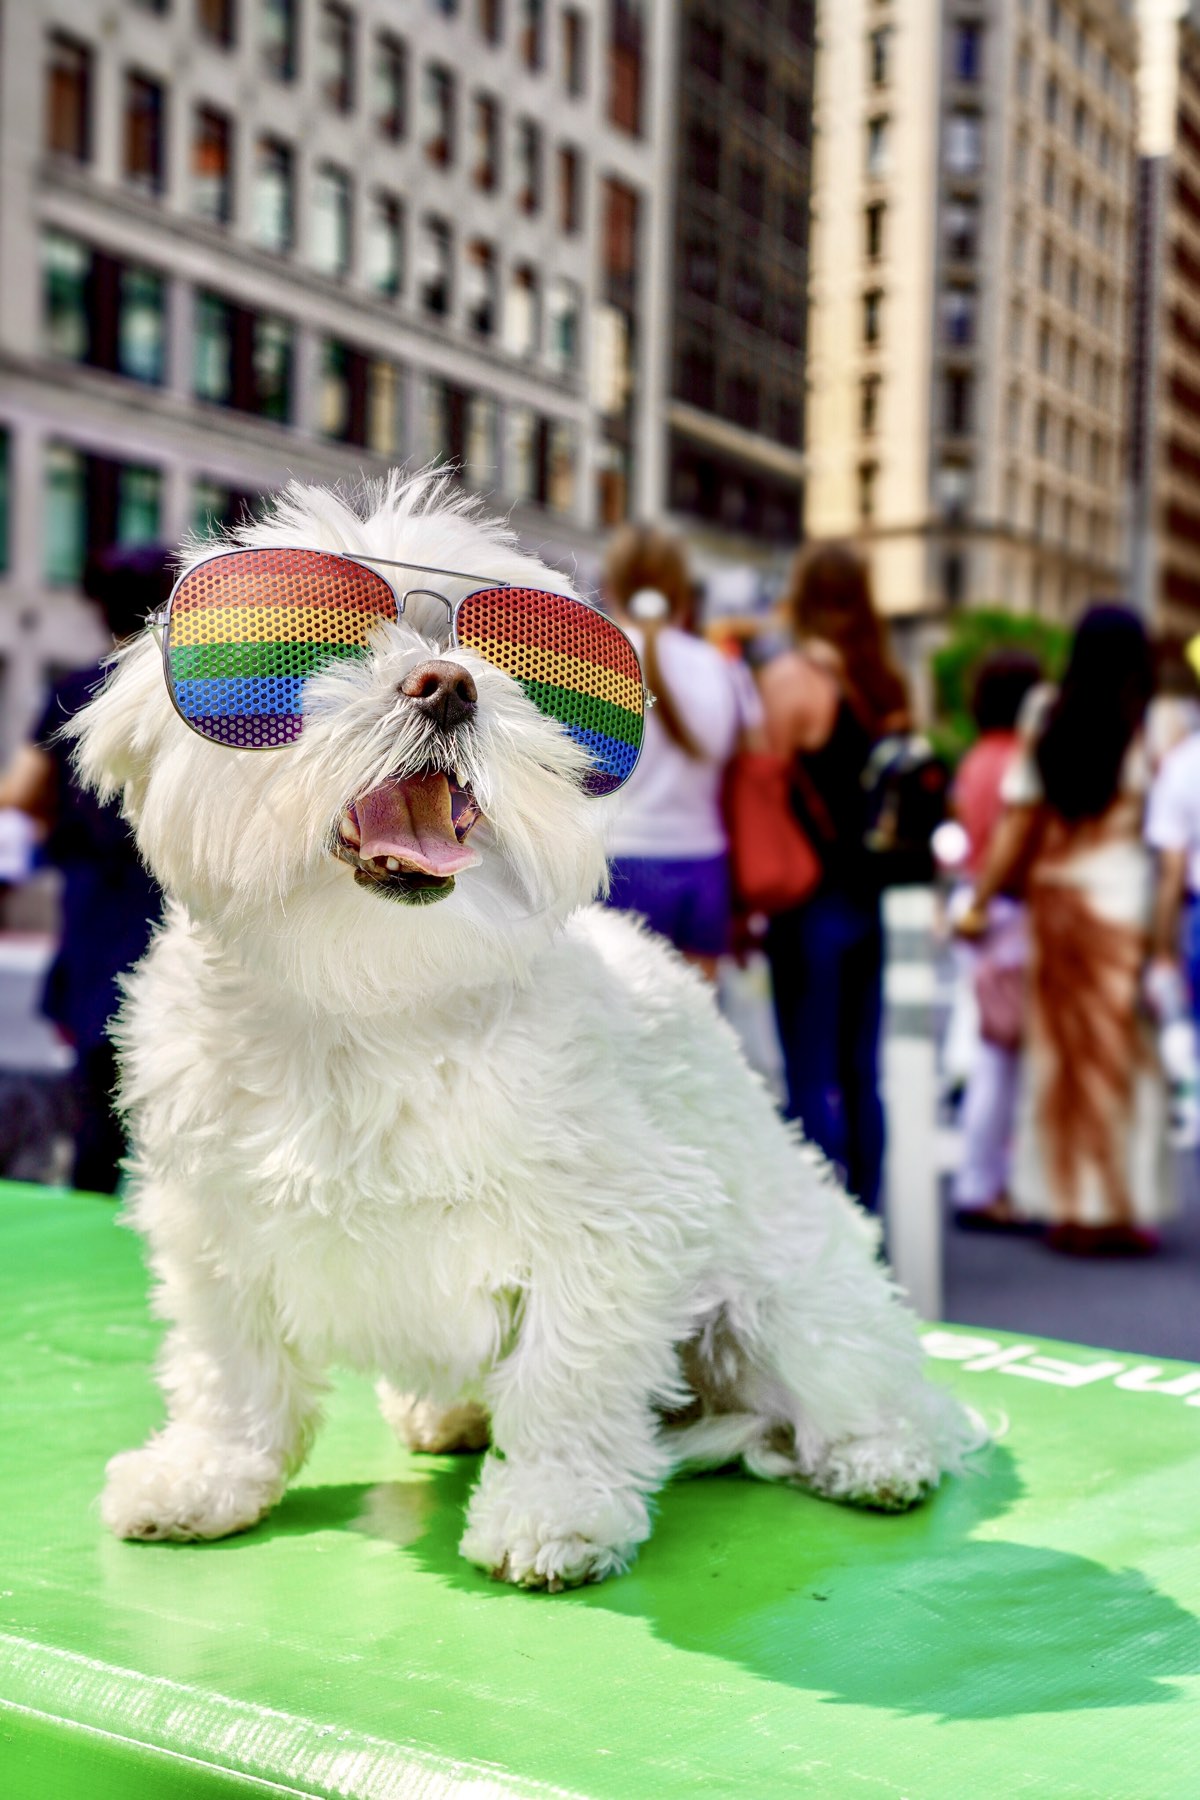 Small white dog wearing gay pride colorful sunglasses outdoors.